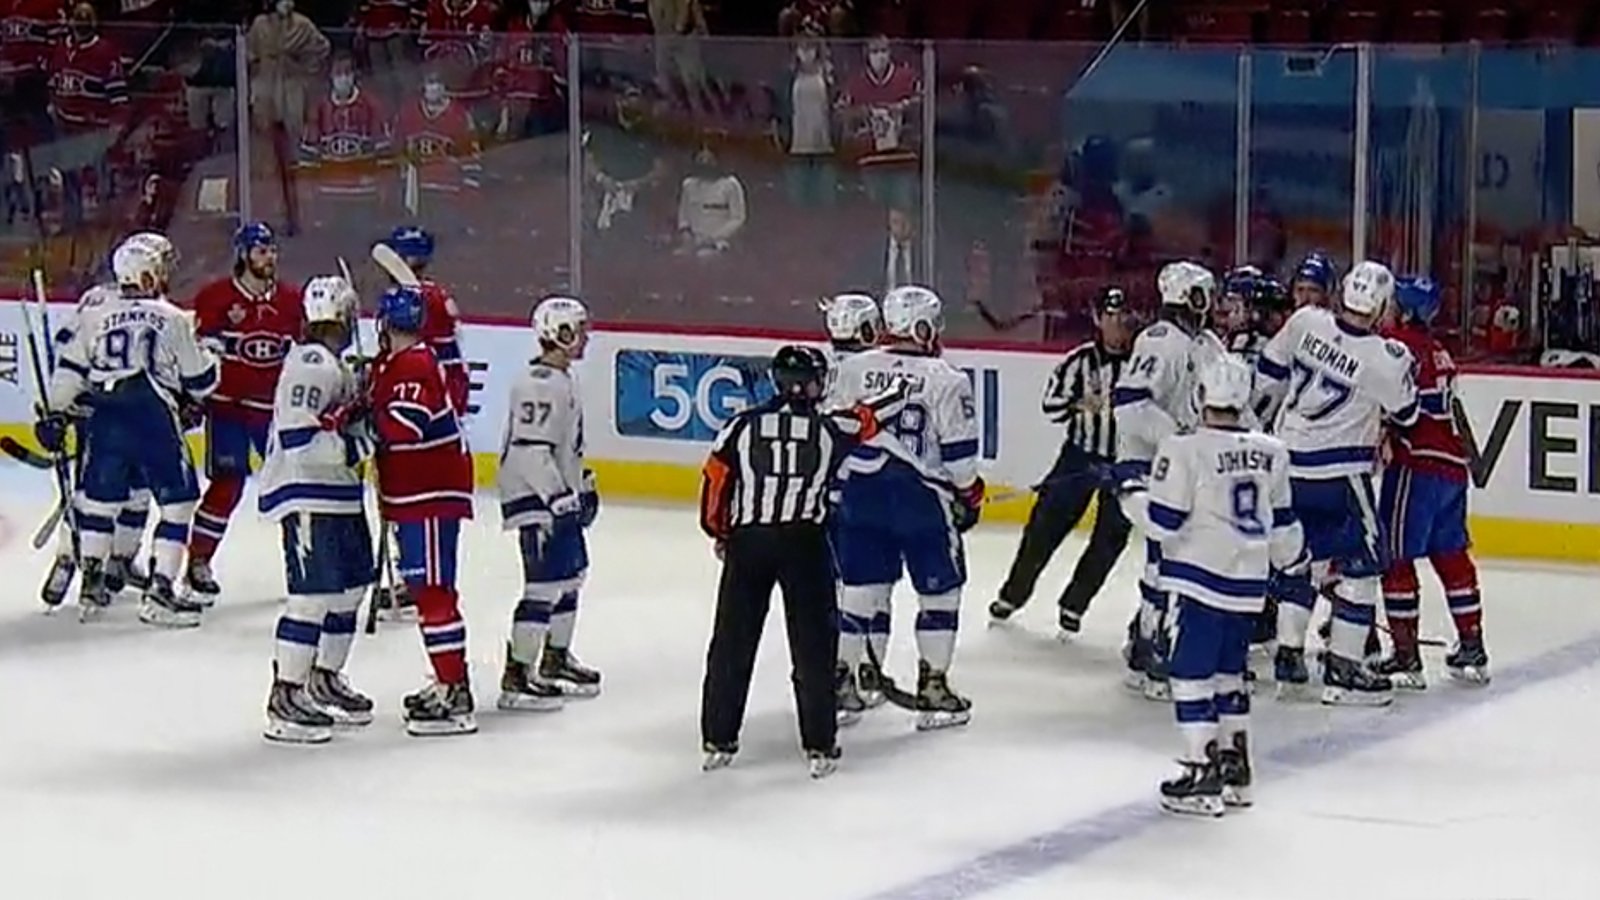 Both benches empty as tempers flare in Game 4